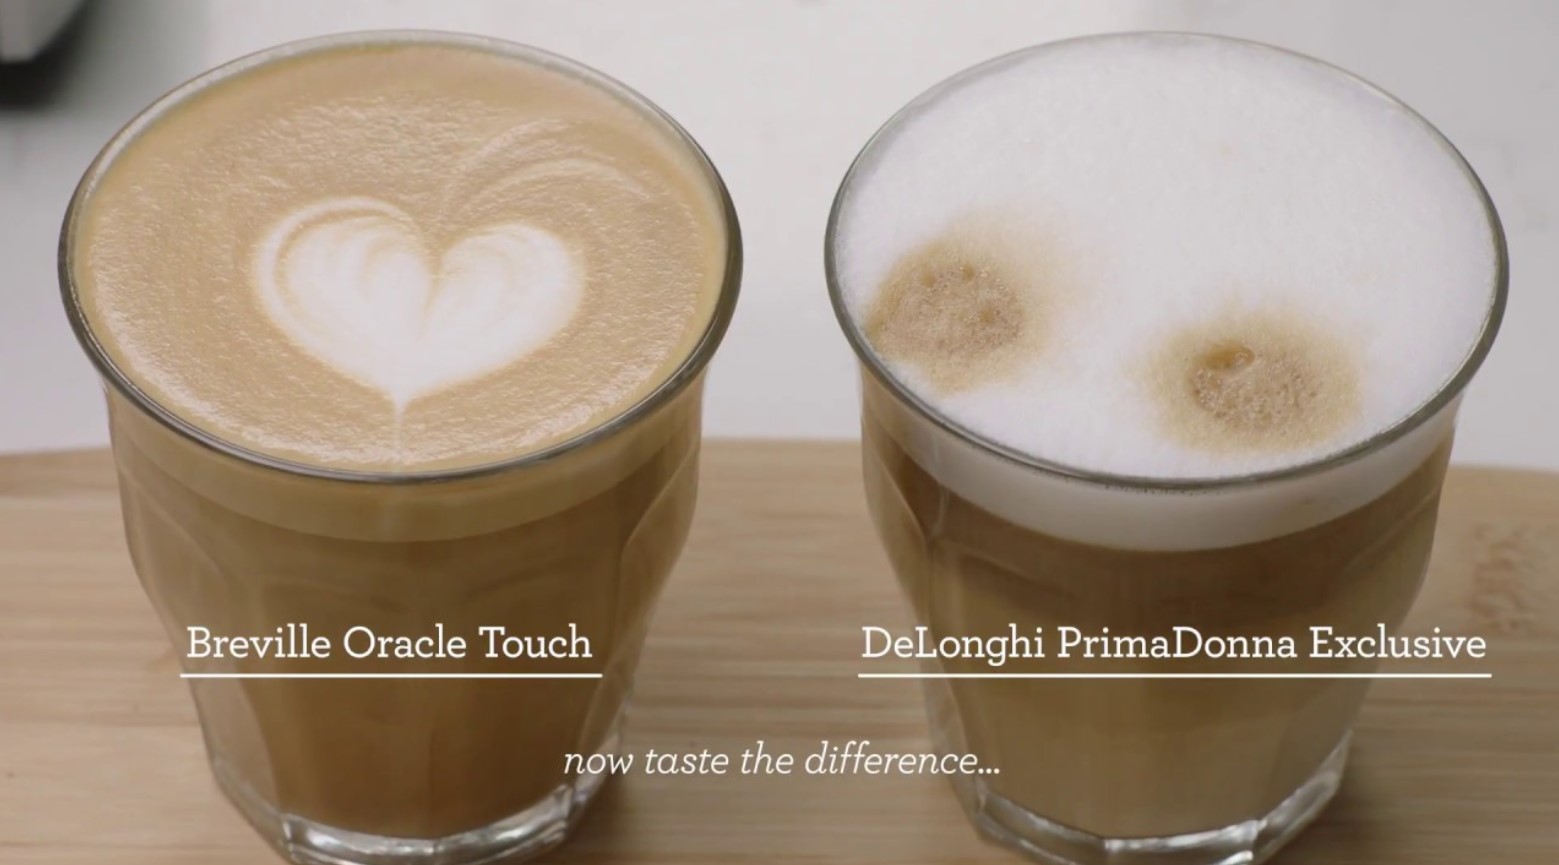 Breville vs DeLonghi-What is the difference?